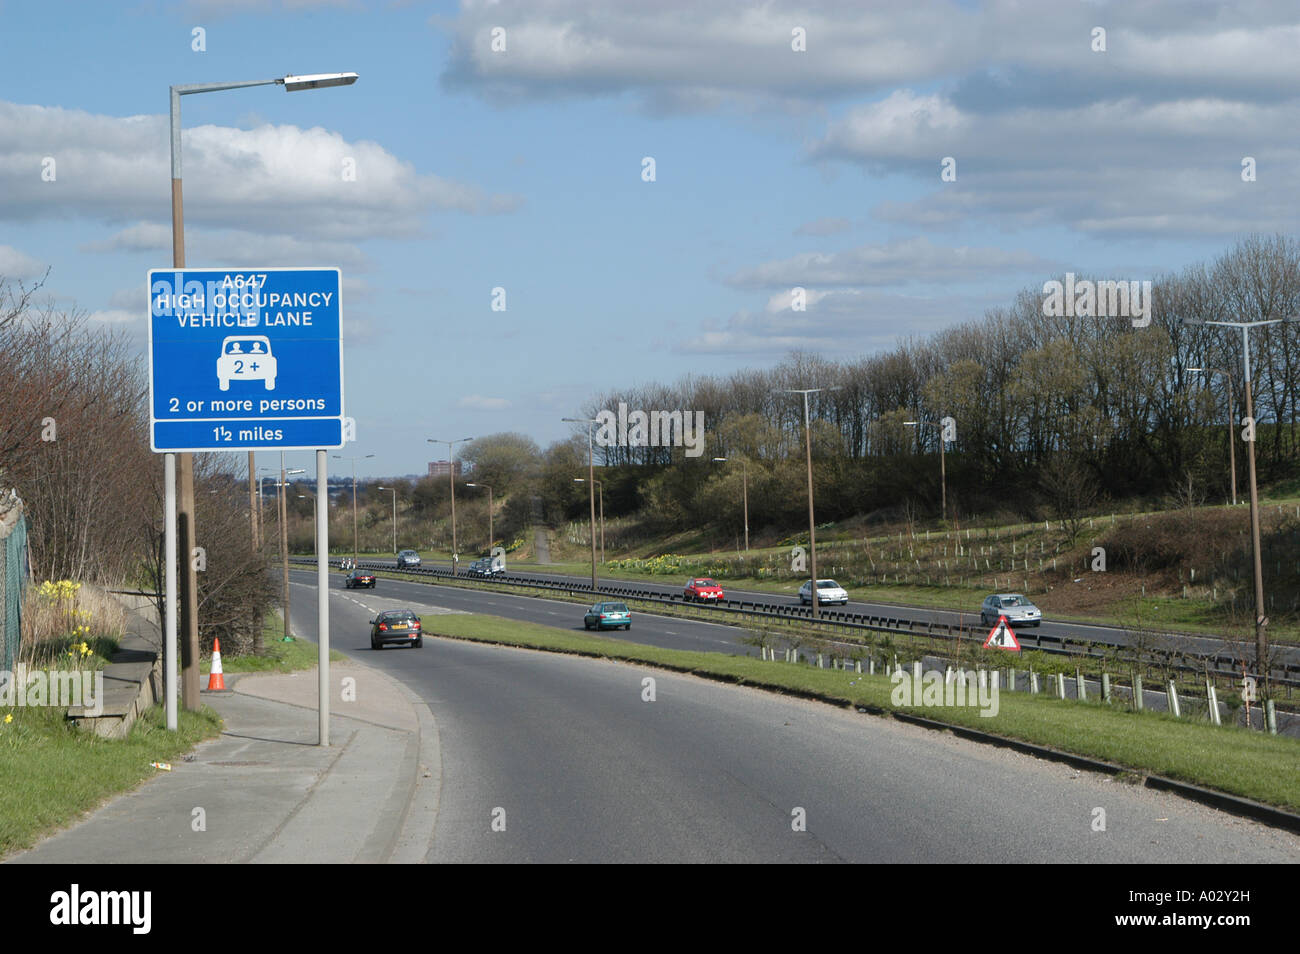 High occupancy vehicle lane sign to encourage car sharing among commuting drivers in the uk Stock Photo